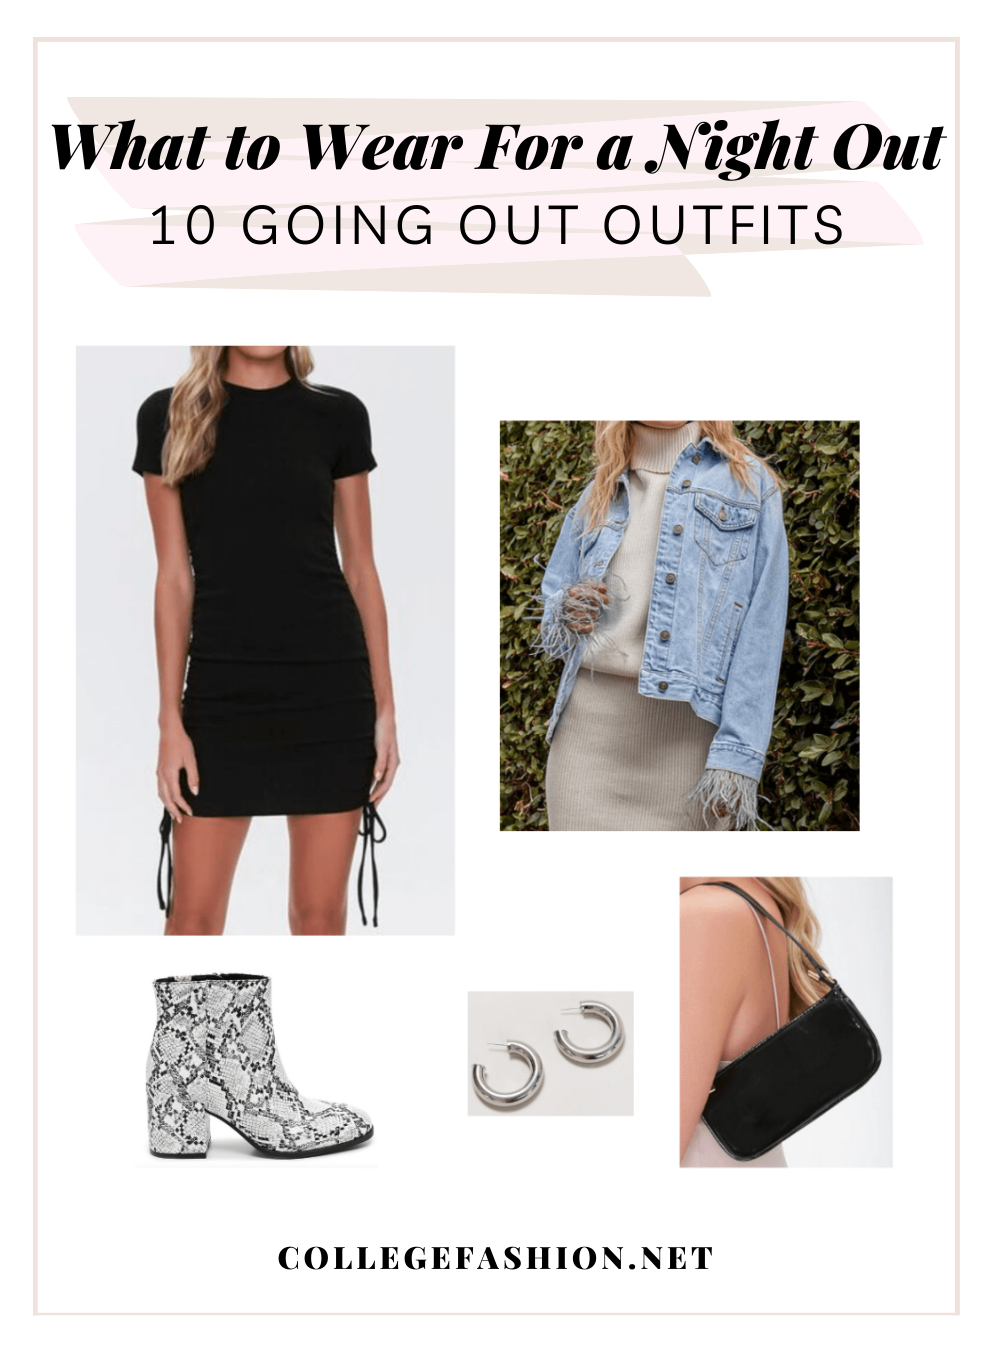 Going Out Outfits for Women